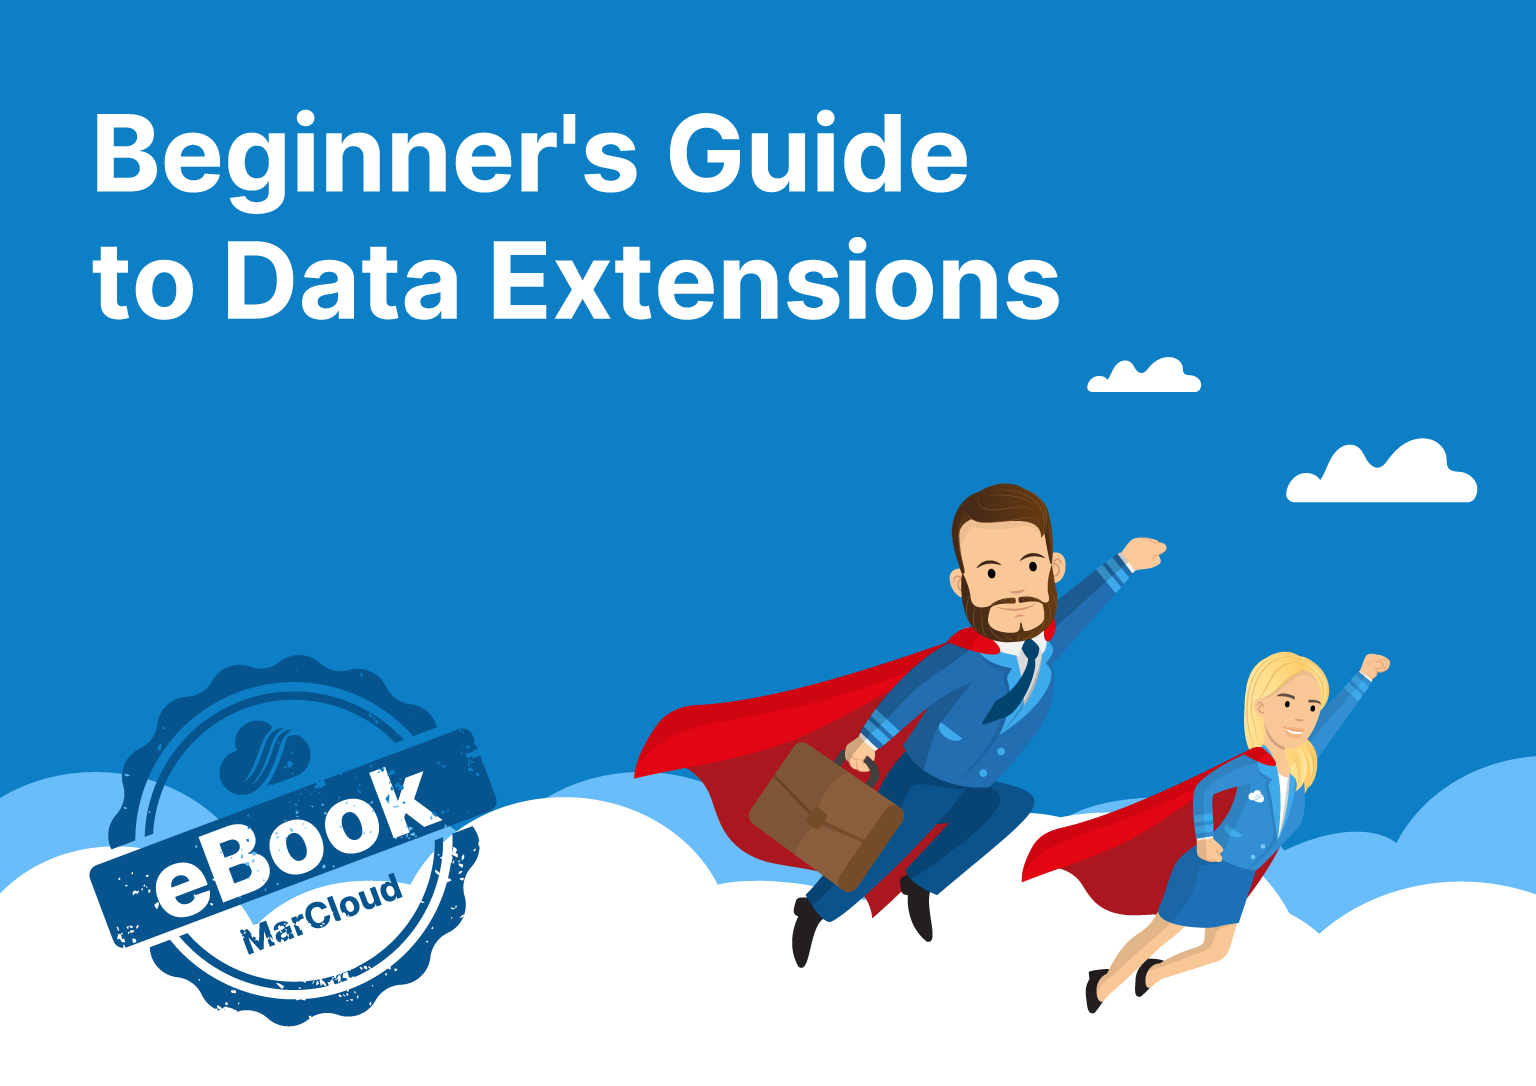 Marketing Cloud Beginners guide to data extensions